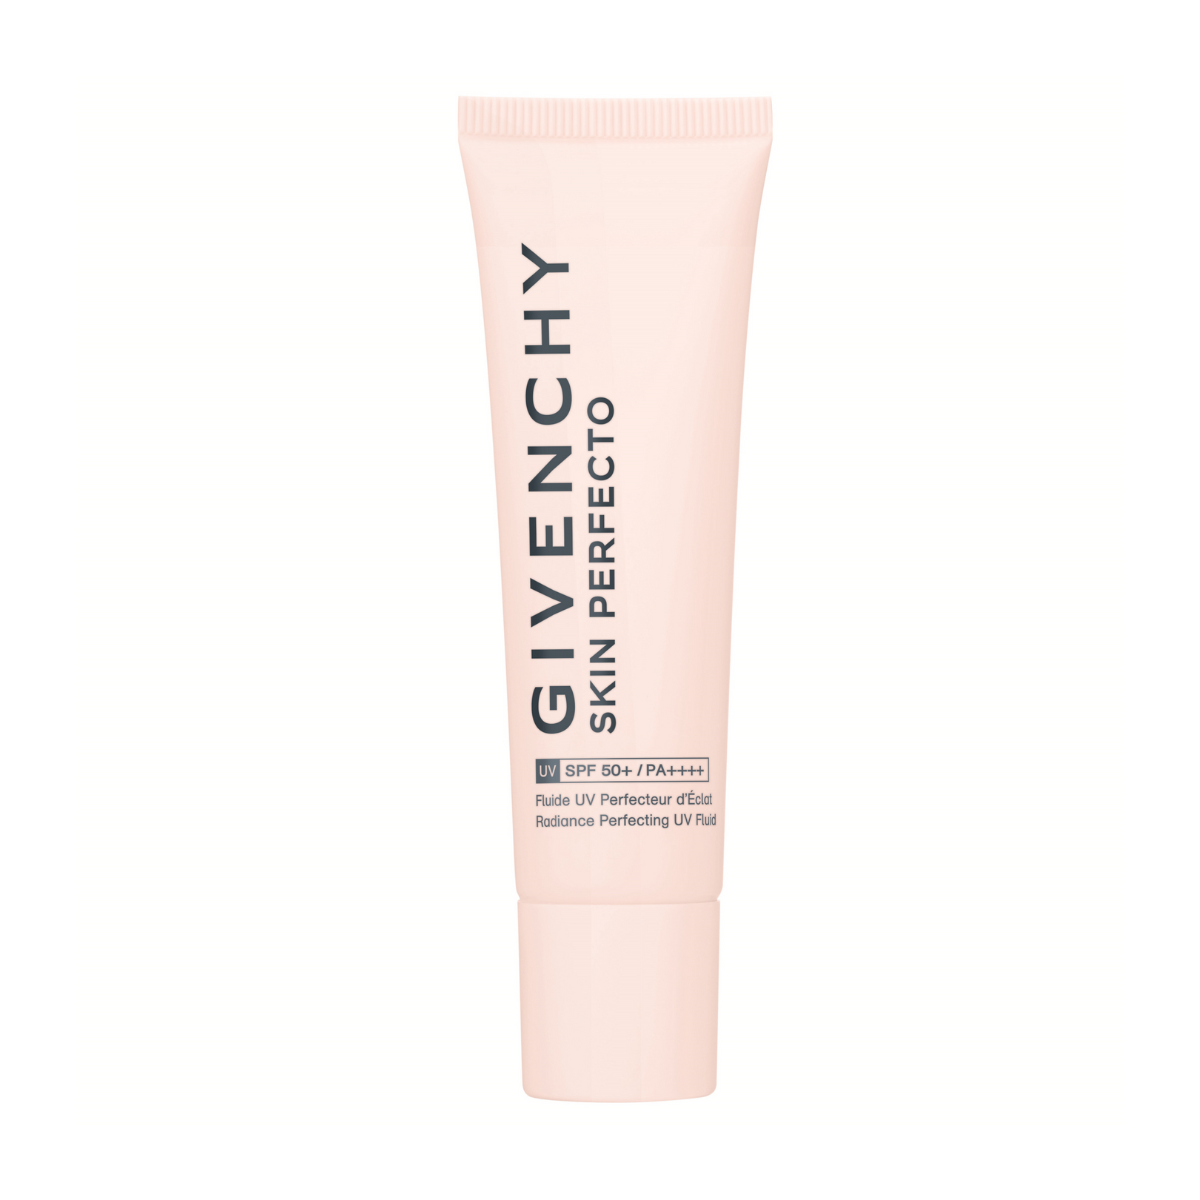 Givenchy Skin Perfecto Fluide UV